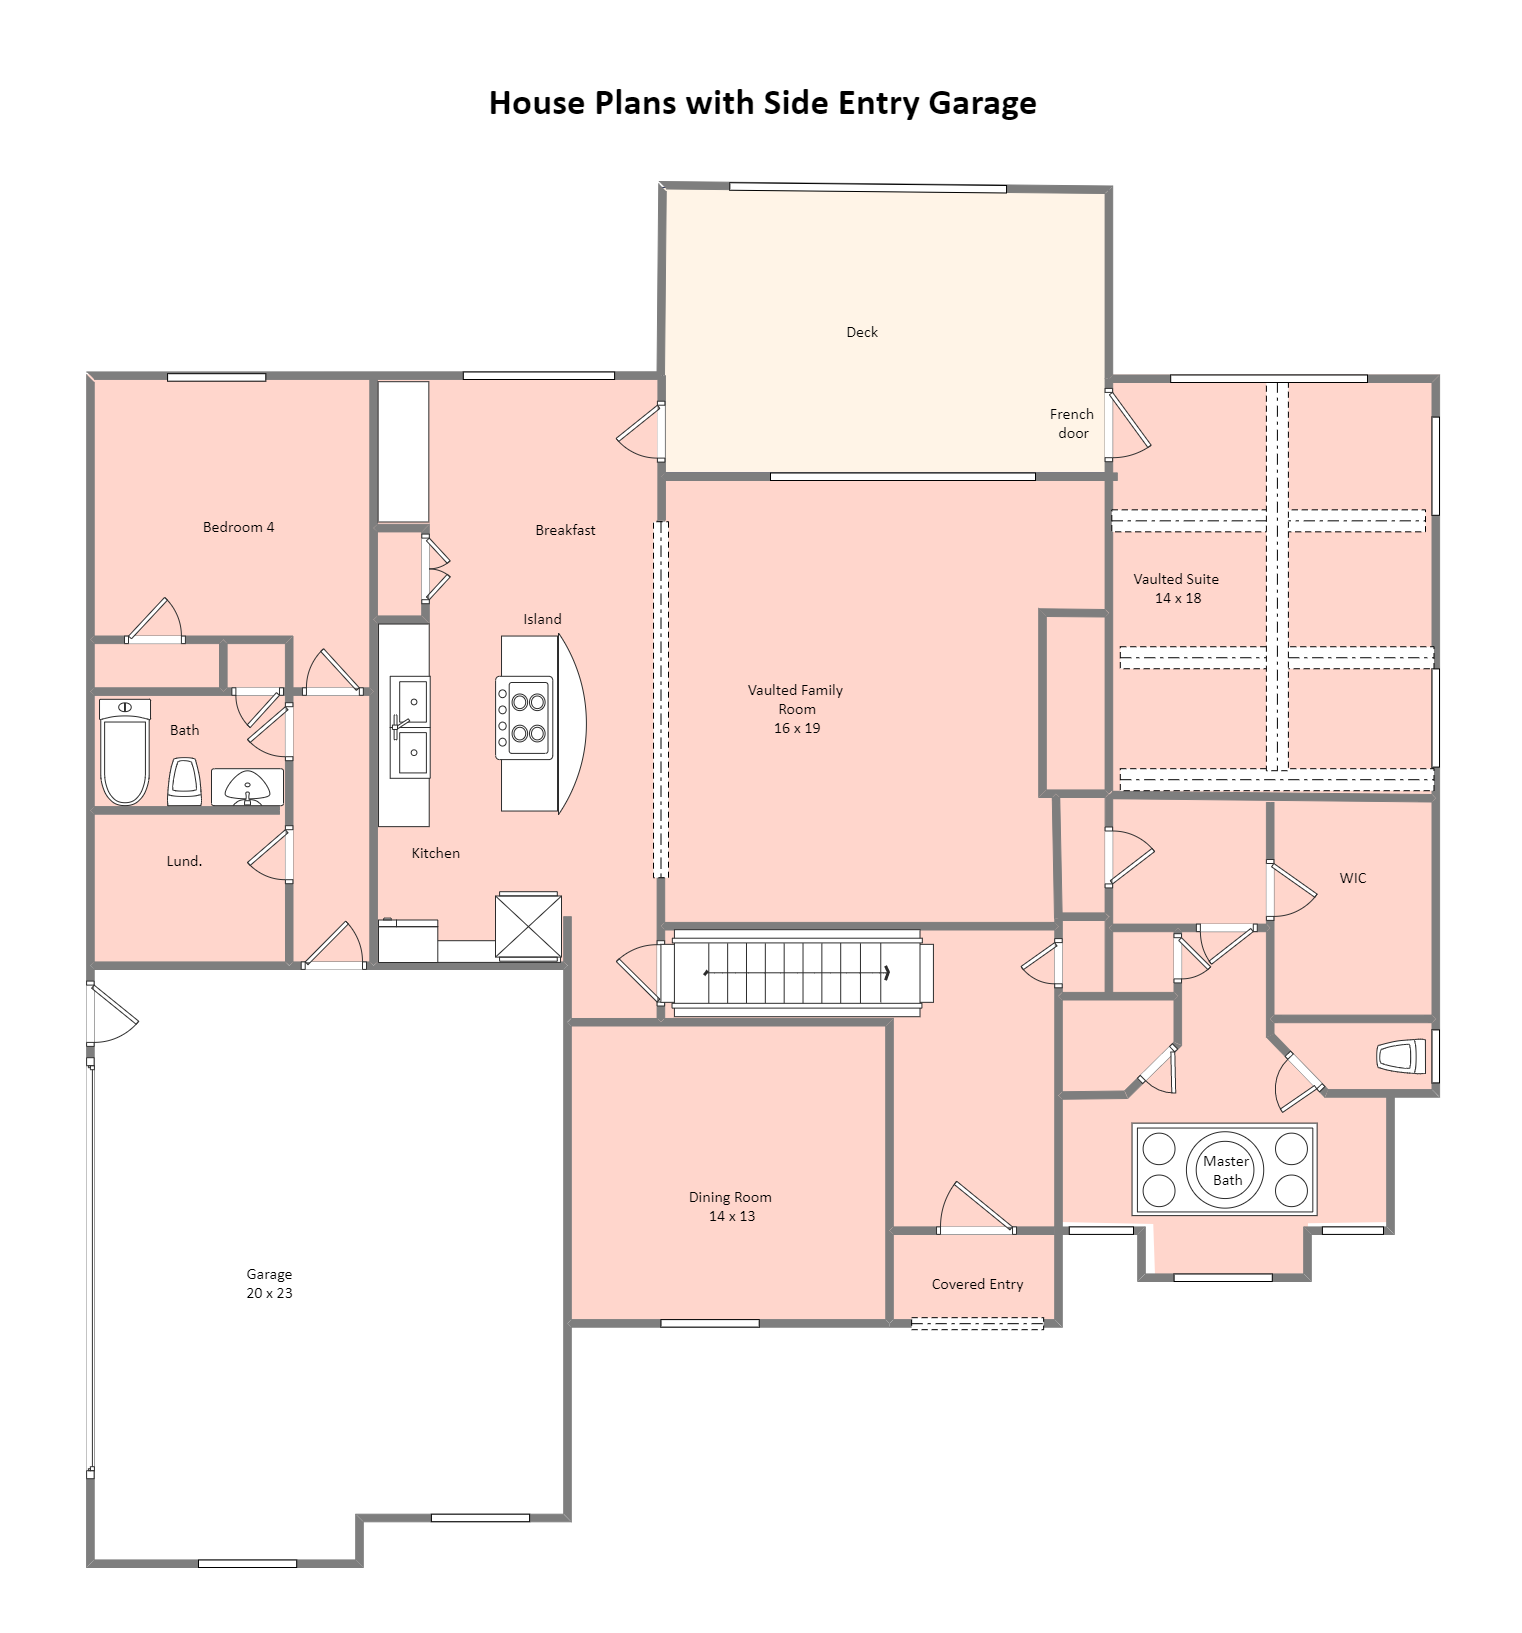 House Plans with Side Entry Garage